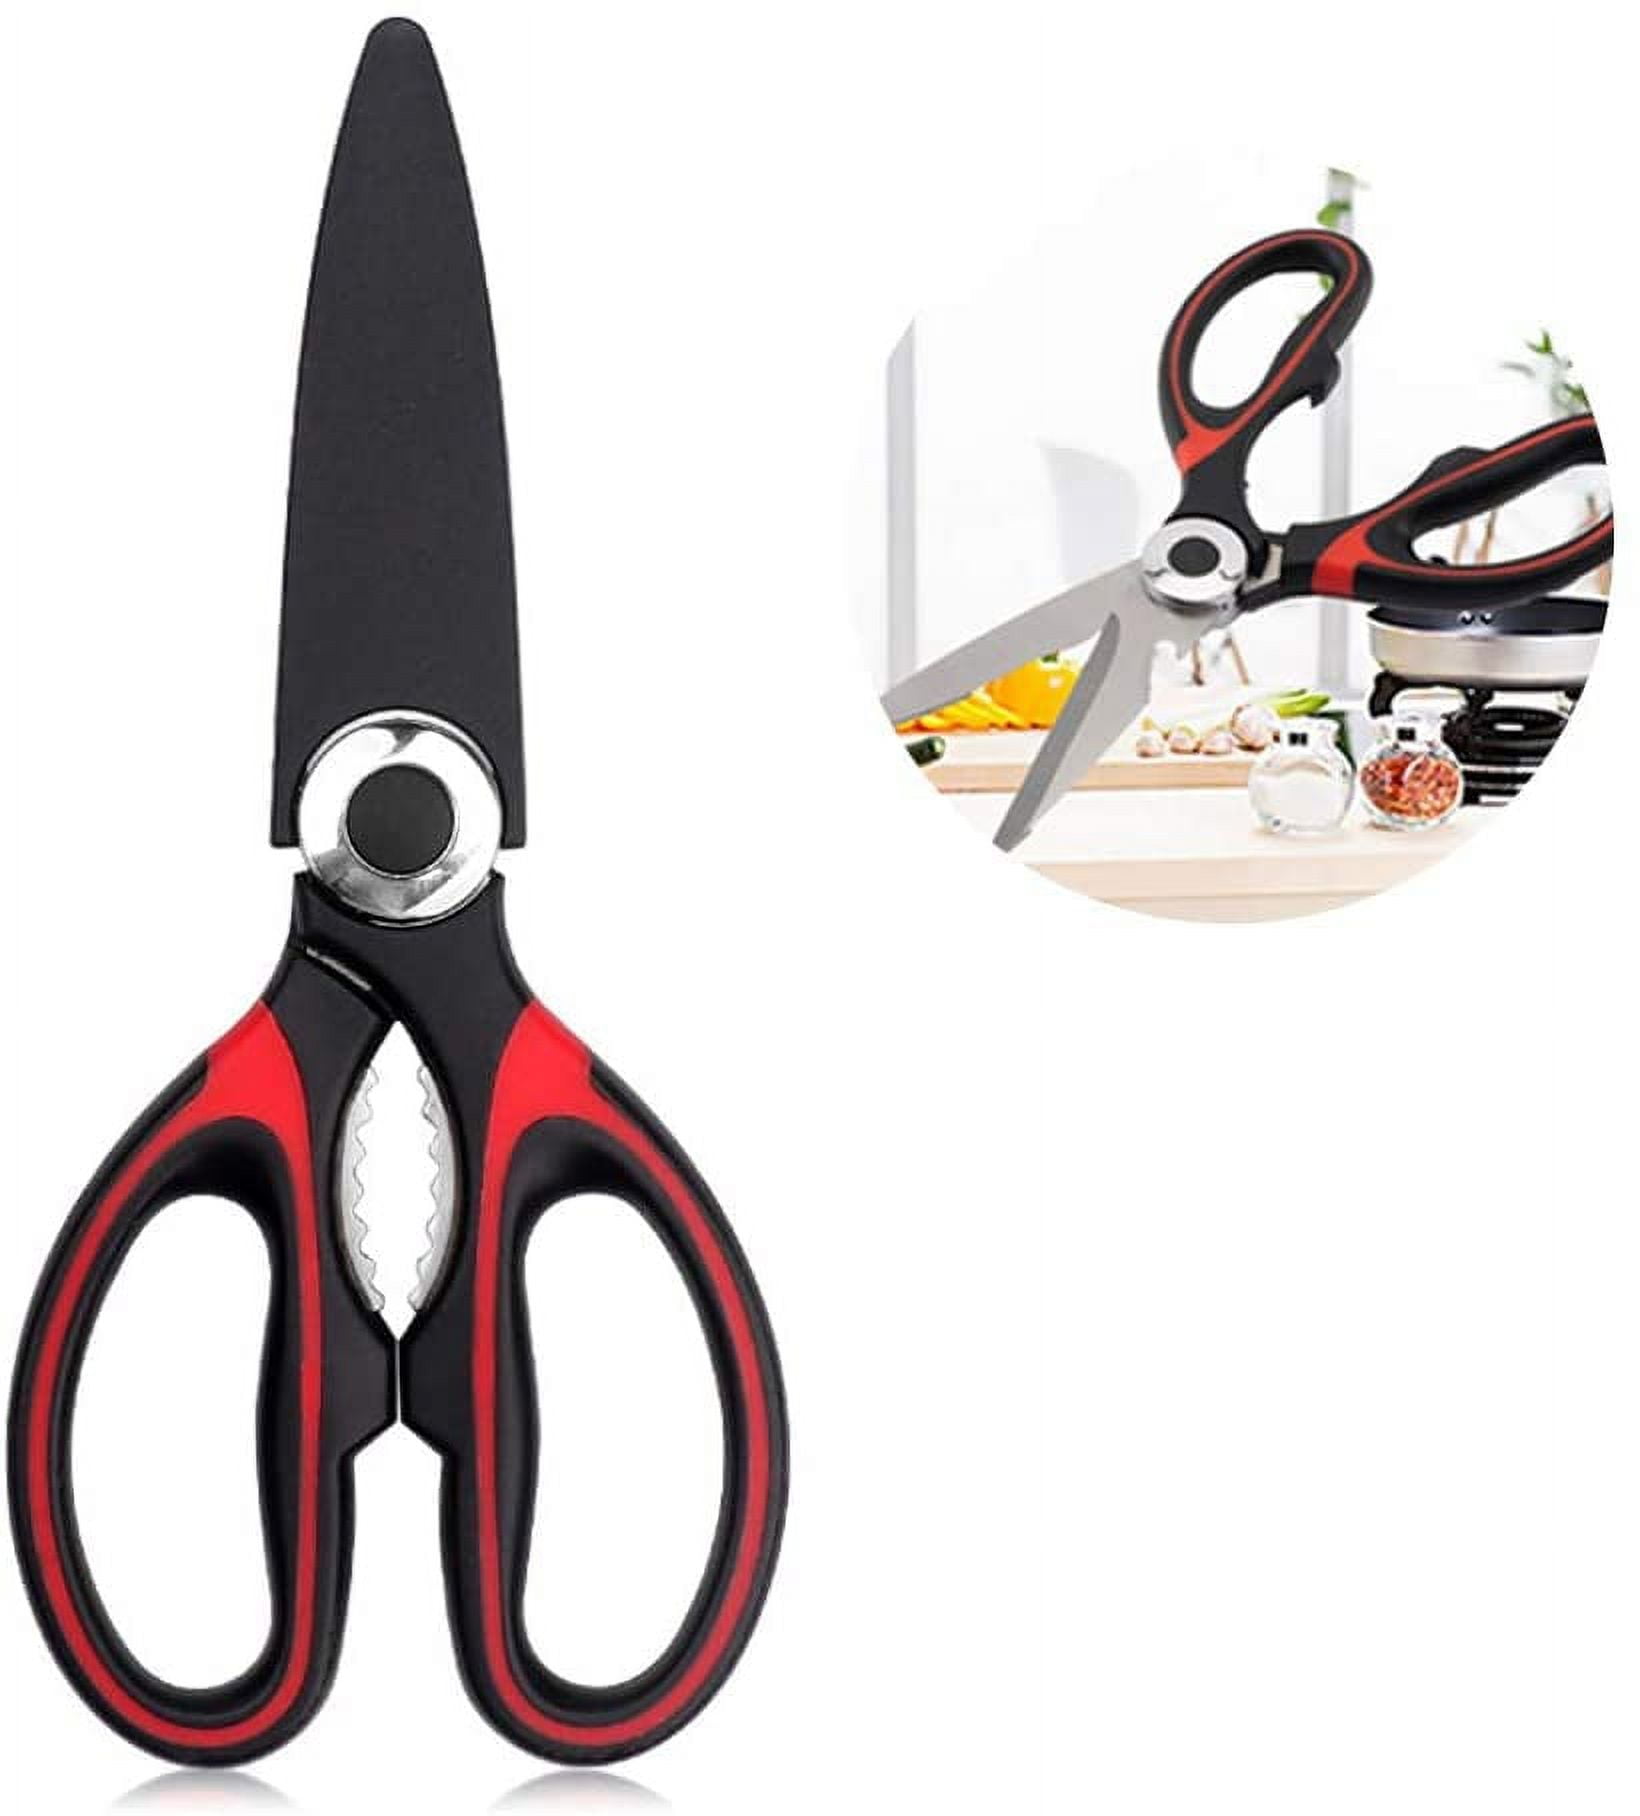 Heavy Duty Poultry Shears Scissors Utility Ultra Sharp Spring Loaded Multi  Blade Herb Scissors For Meat Chicken Fish Seafood BBQ Stainless Steel Food  Scissors Silver From Crazyfairyland, $5.4